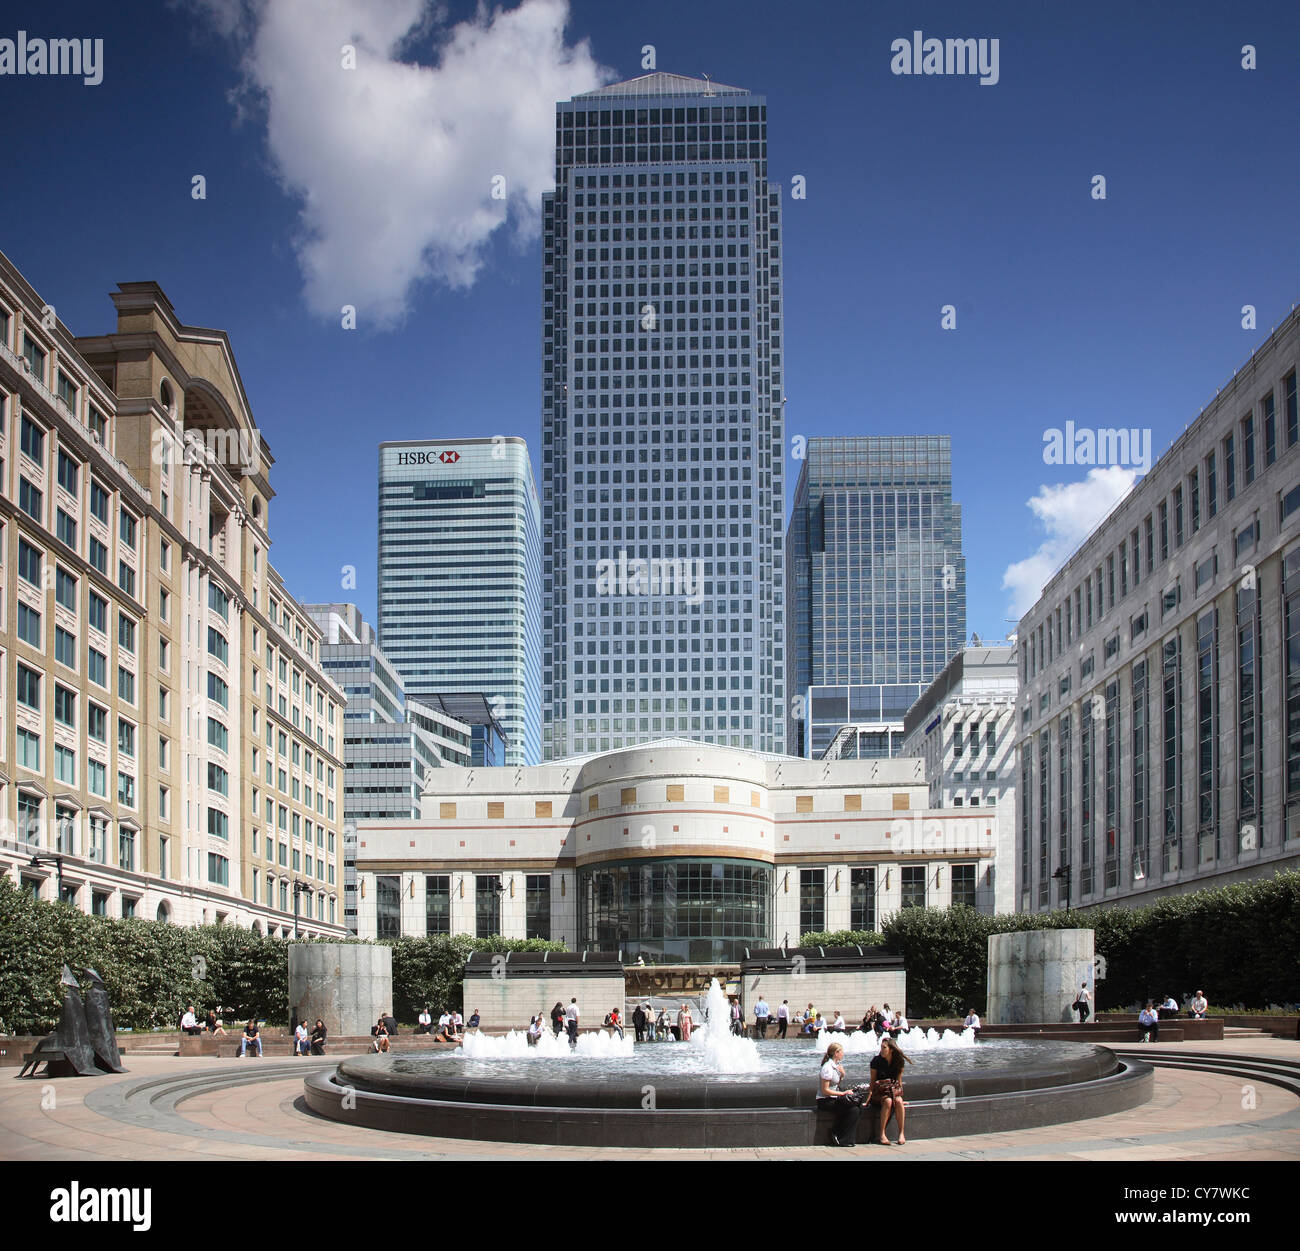 Cabot Square in London's Canary Wharf development showing central tower (1 Canada Square), fountains and surrounding buildings Stock Photo